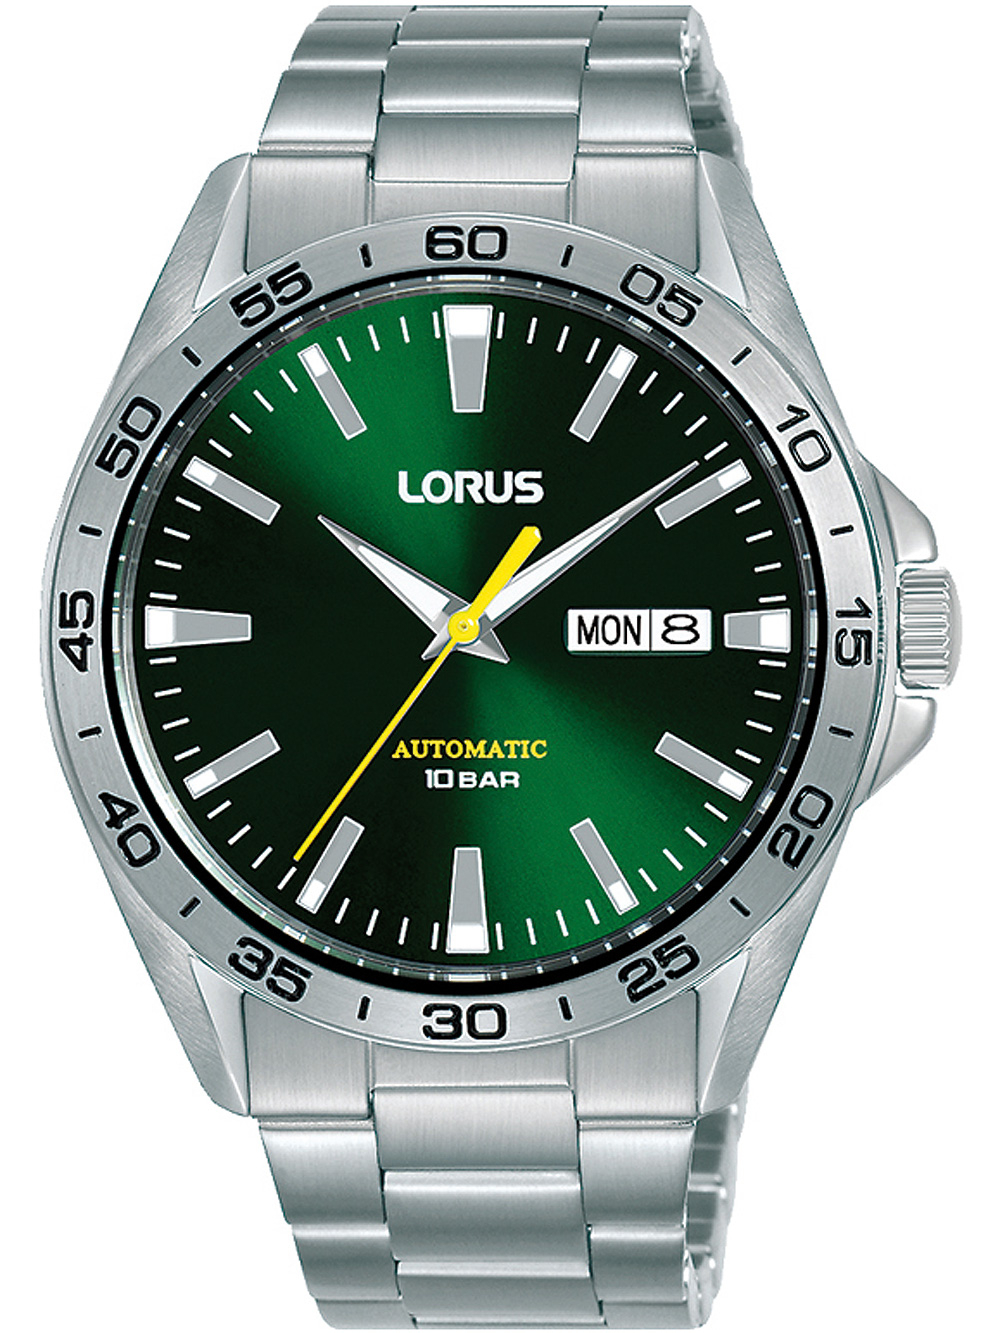 buy watches: & free LORUS secure! postage cheap,